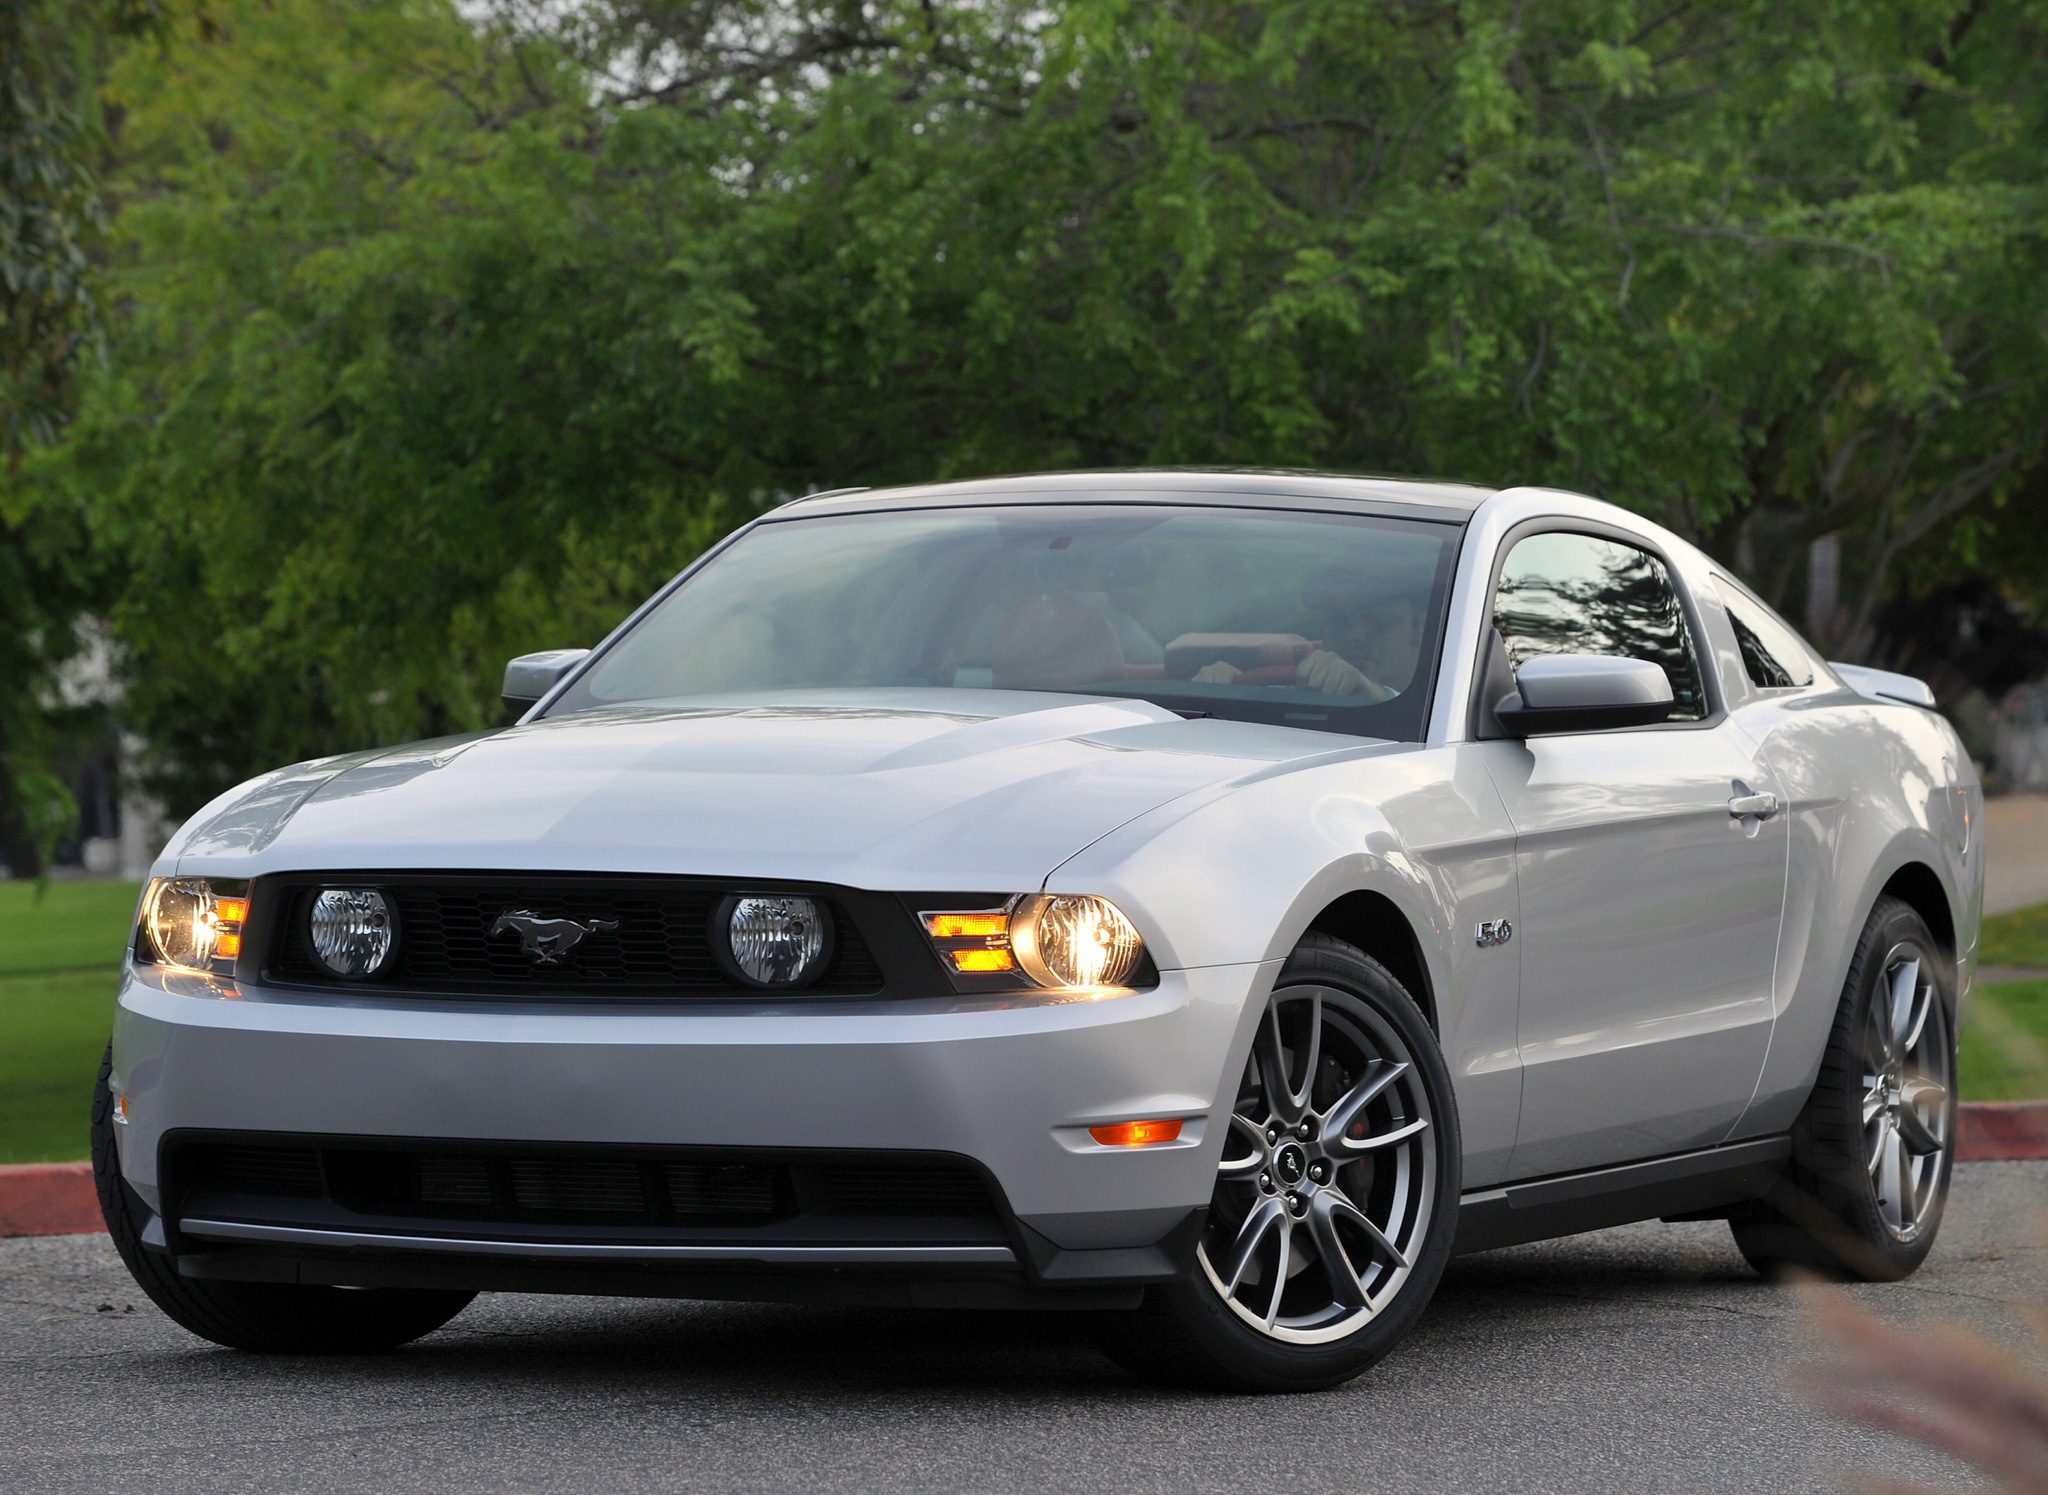 Mustang Of The Day: 2010 Ford Mustang GT